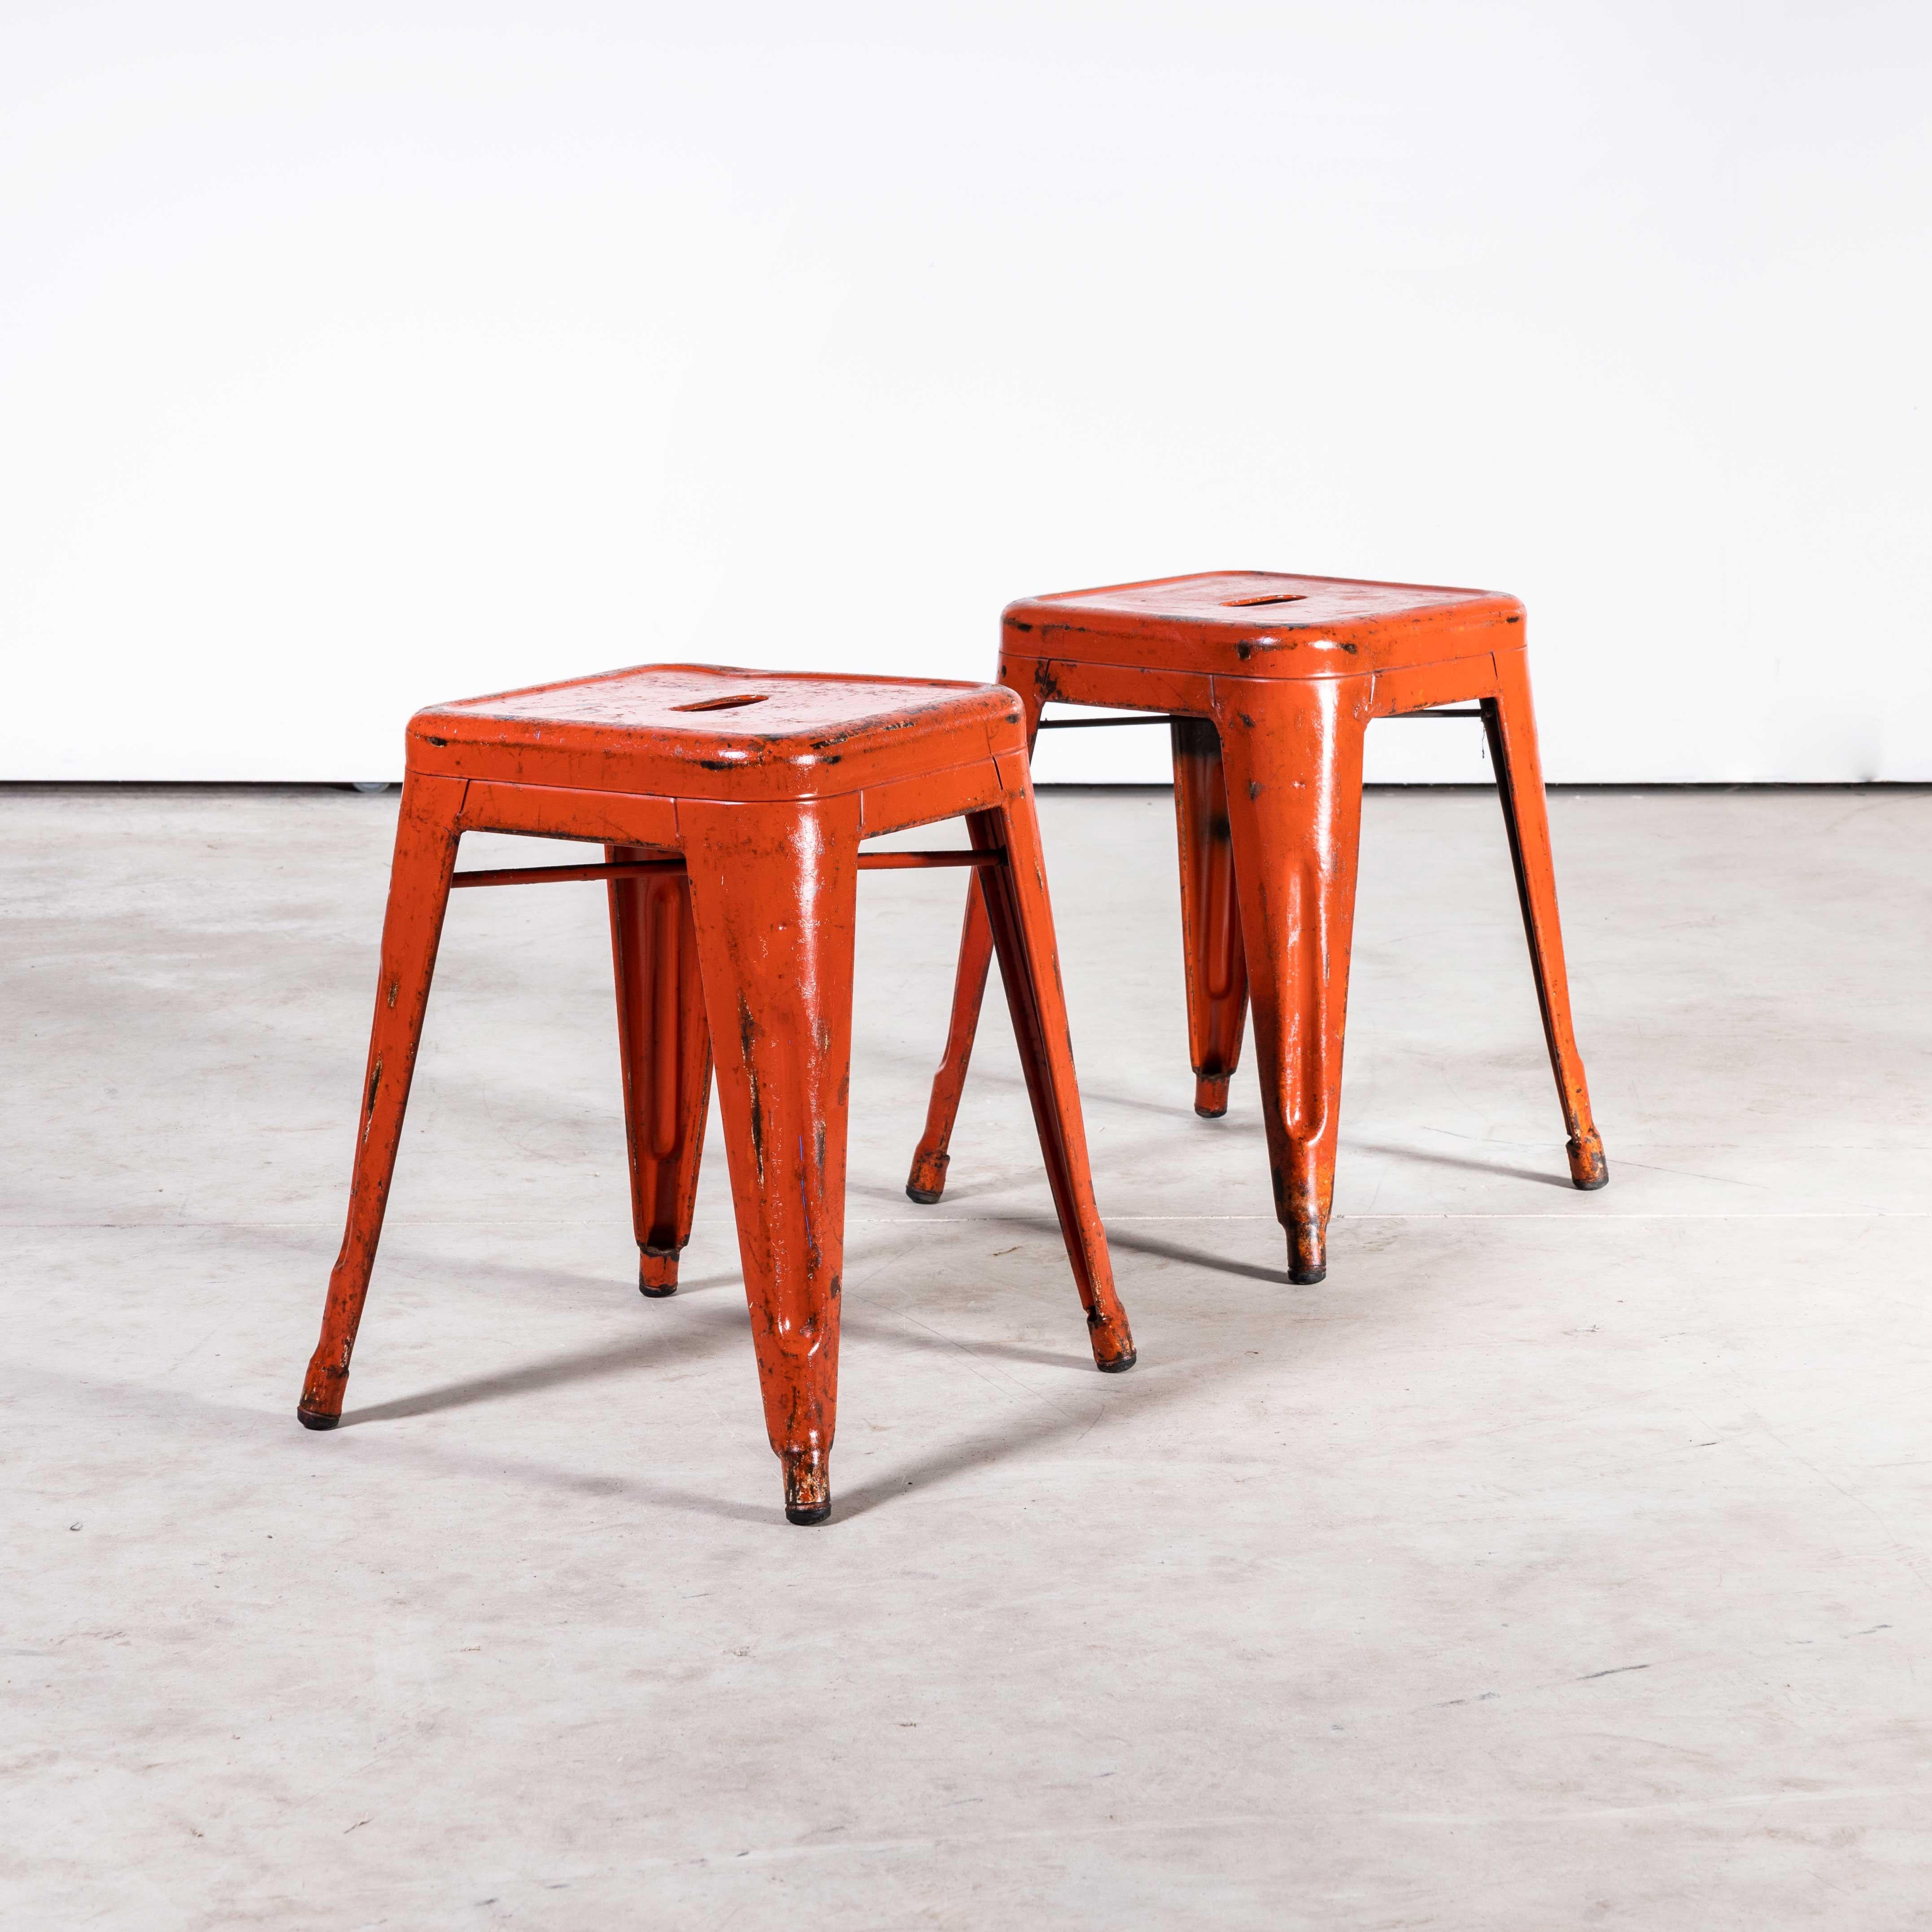 1950’s original French Tolix H metal café dining stools red – pair
1950’s original French Tolix H metal café dining stools red – pair. Tolix is one of our all time favourite companies. In 1907 Frenchman Xavier Pauchard discovered that he could